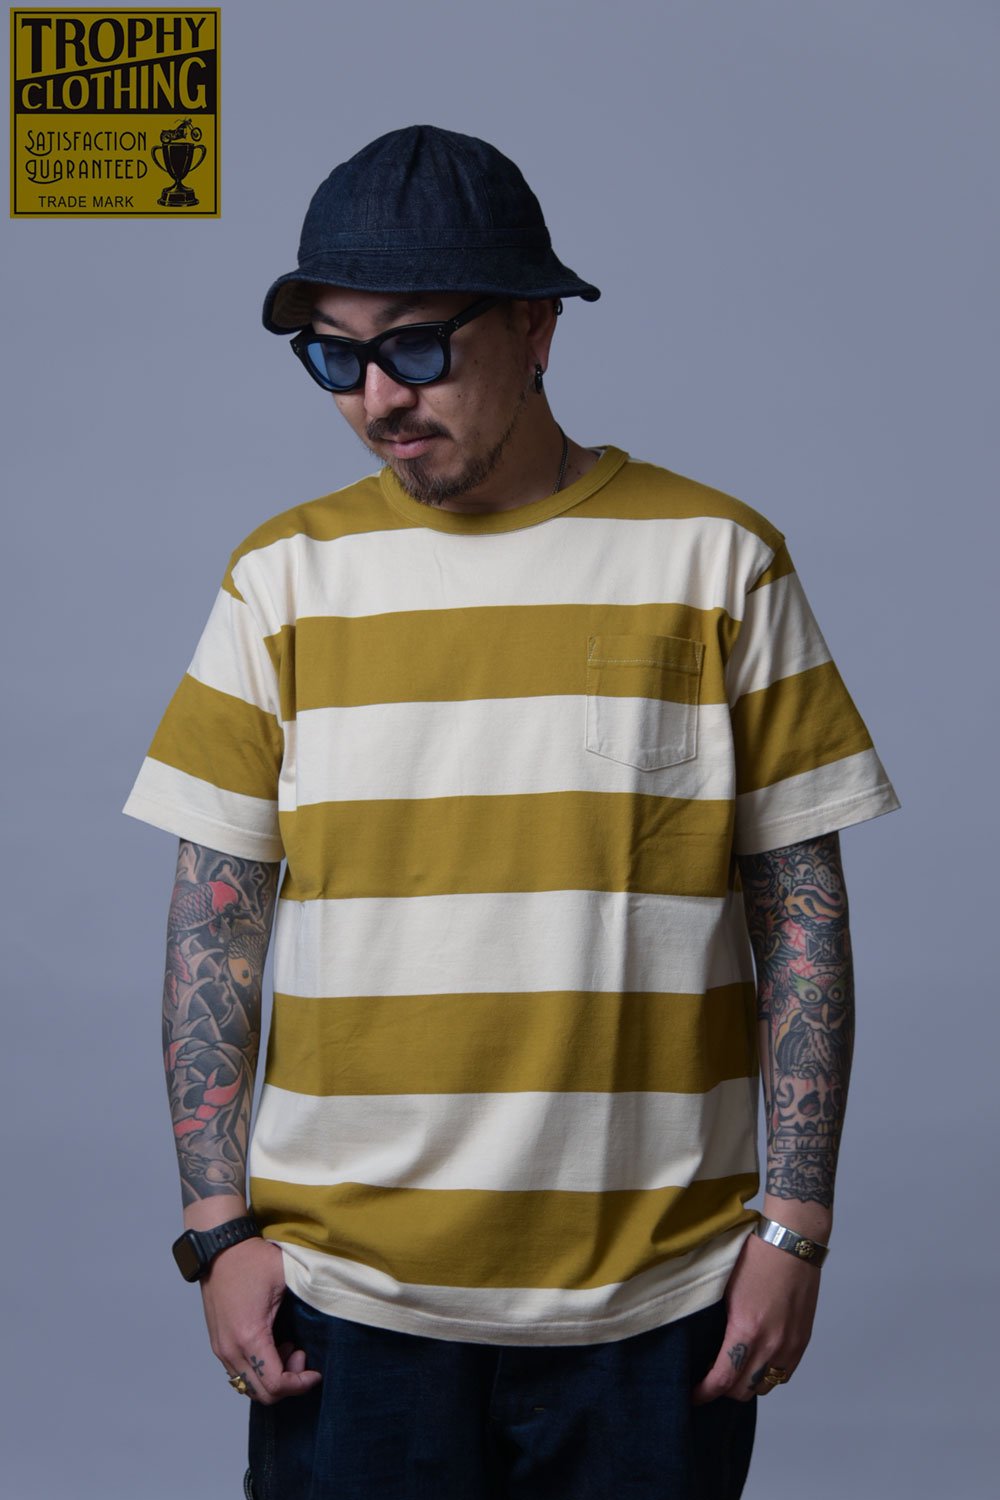 TROPHY CLOTHING(トロフィークロージング) ボーダーTシャツ WIDE BORDER S/S TEE TR23SS-205 通販正規取扱  | ハーレムストア公式通販サイト